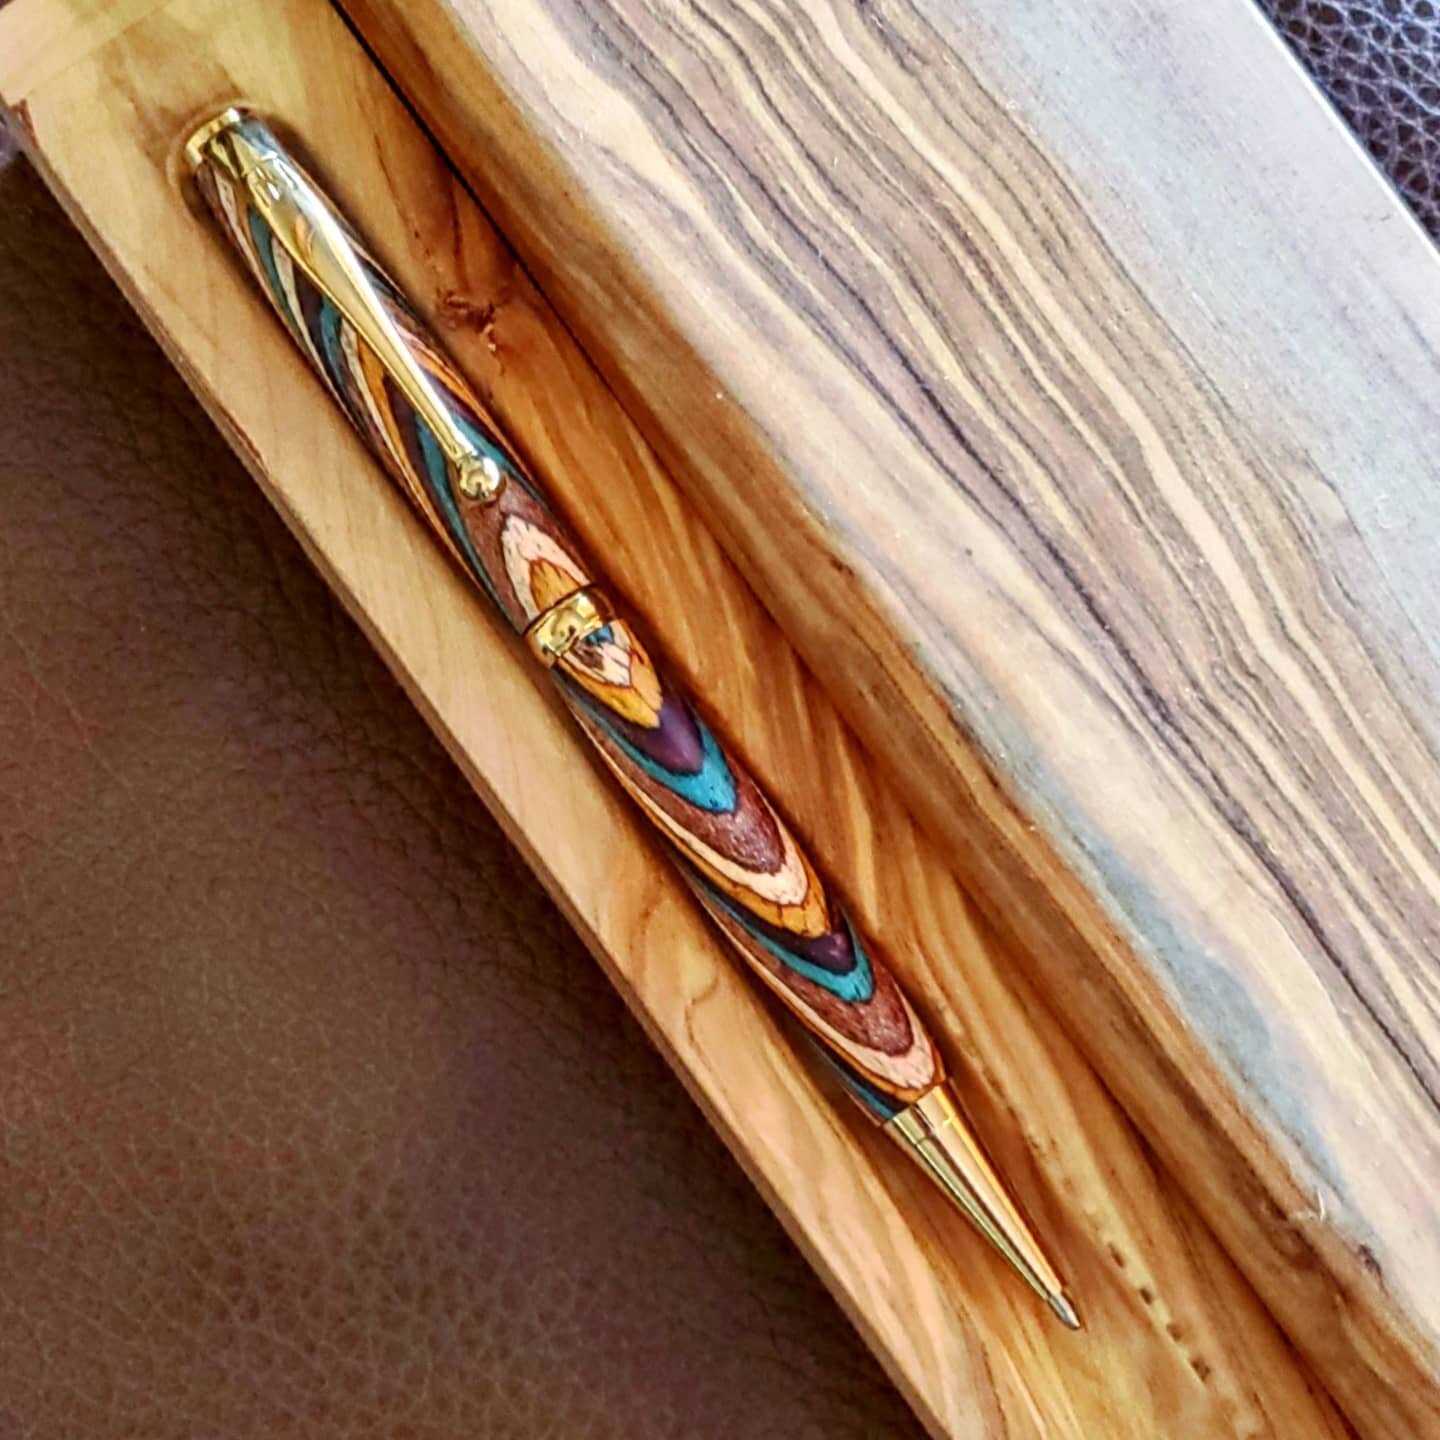 Jadon's pen up close! Sitting in a new olivewood desk accessory!

This 7-year-old just made a pen with zero &quot;hands on&quot; help! Already loaded with Fisher Space ink and sold! 
.
.
#jadonroland #woodnotch #woodnotchpens #woodworking #youngentre